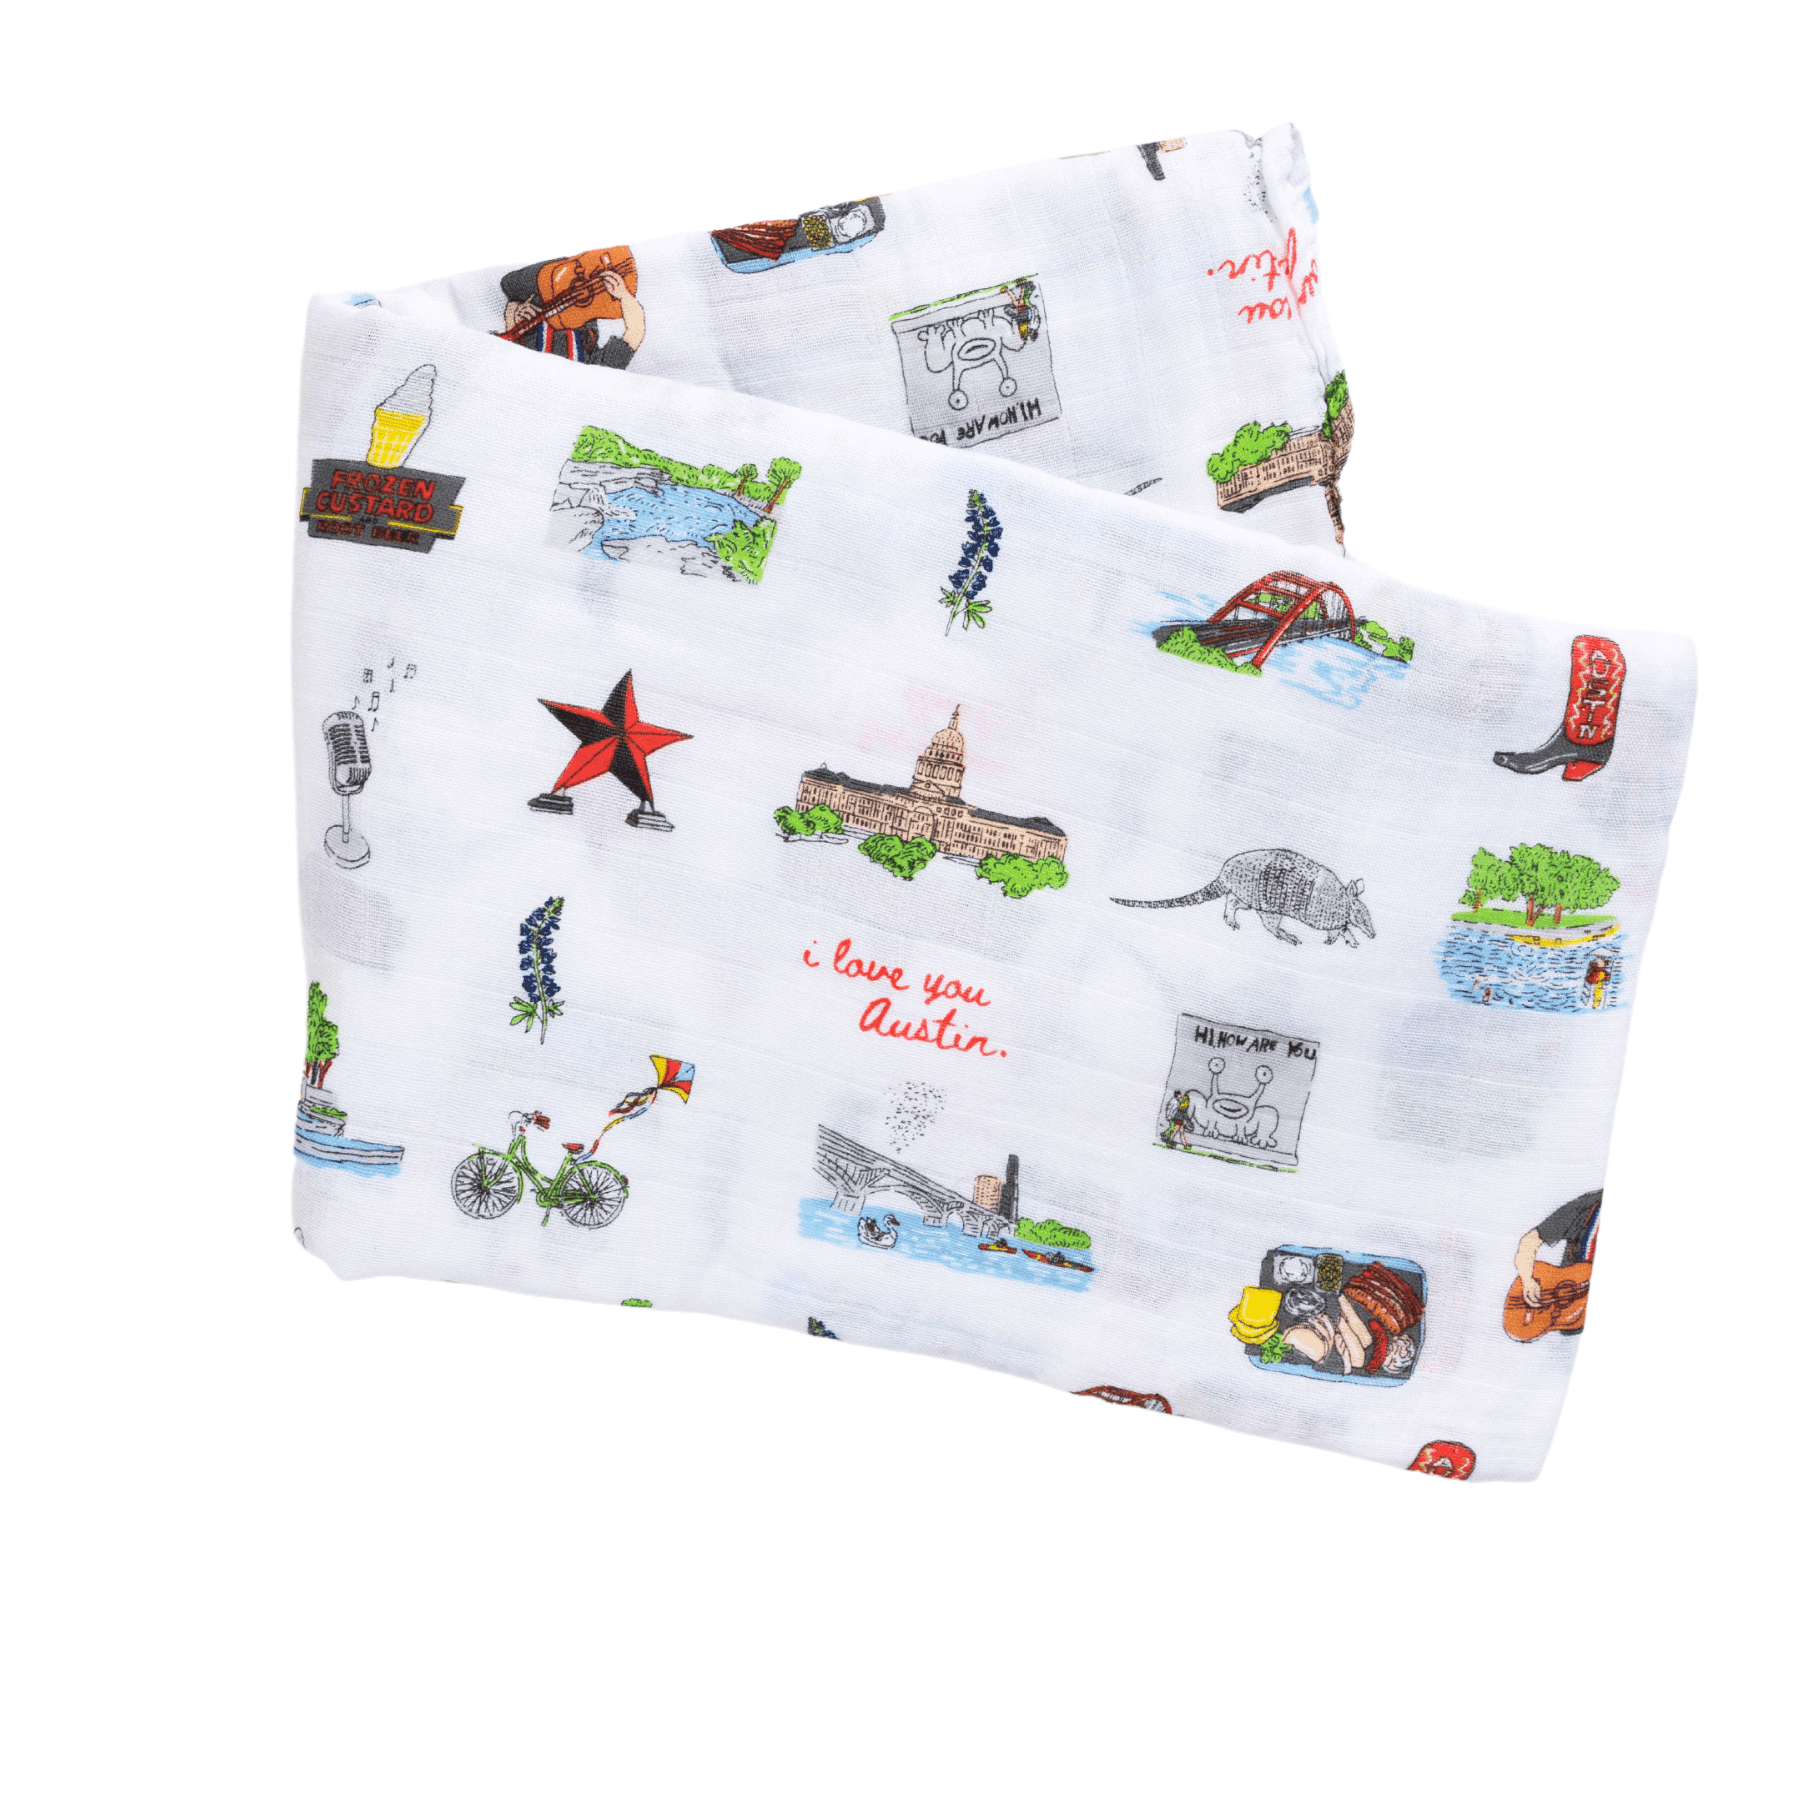 Gift set with Austin-themed baby muslin swaddle blanket and burp cloth/bib combo, featuring Texas icons.